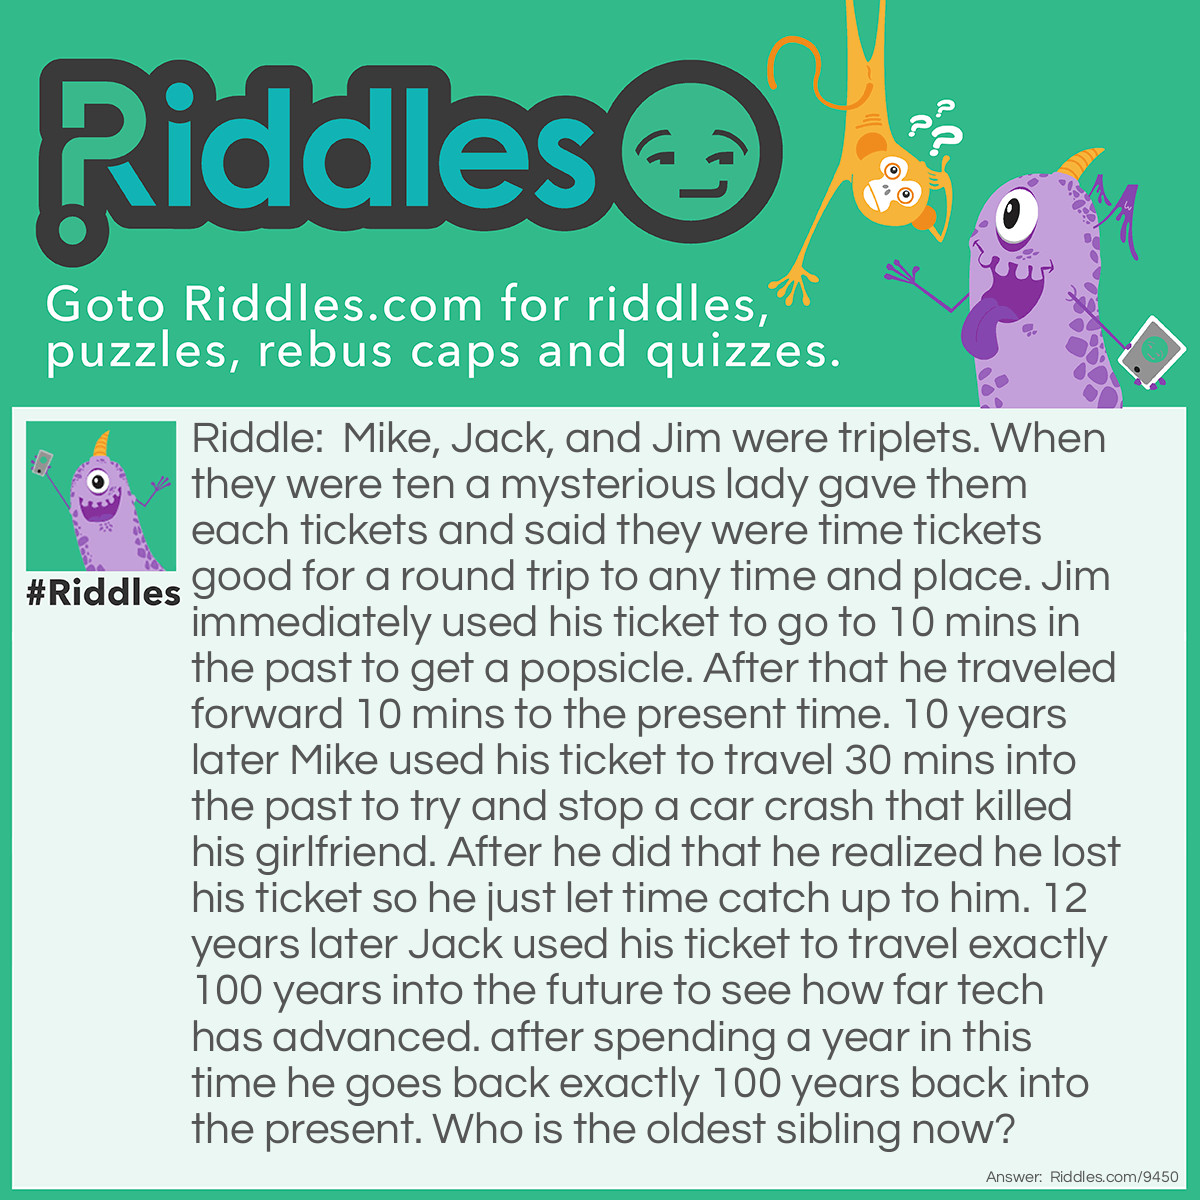 Riddle: Mike, Jack, and Jim were triplets. When they were ten a mysterious lady gave them each tickets and said they were time tickets good for a round trip to any time and place. Jim immediately used his ticket to go to 10 mins in the past to get a popsicle. After that he traveled forward 10 mins to the present time. 10 years later Mike used his ticket to travel 30 mins into the past to try and stop a car crash that killed his girlfriend. After he did that he realized he lost his ticket so he just let time catch up to him. 12 years later Jack used his ticket to travel exactly 100 years into the future to see how far tech has advanced. after spending a year in this time he goes back exactly 100 years back into the present. Who is the oldest sibling now? Answer: Mike, because he went 30 minutes from the past and let time catch up while the others traveled back to the present. Therefore he is older by 30 minutes.